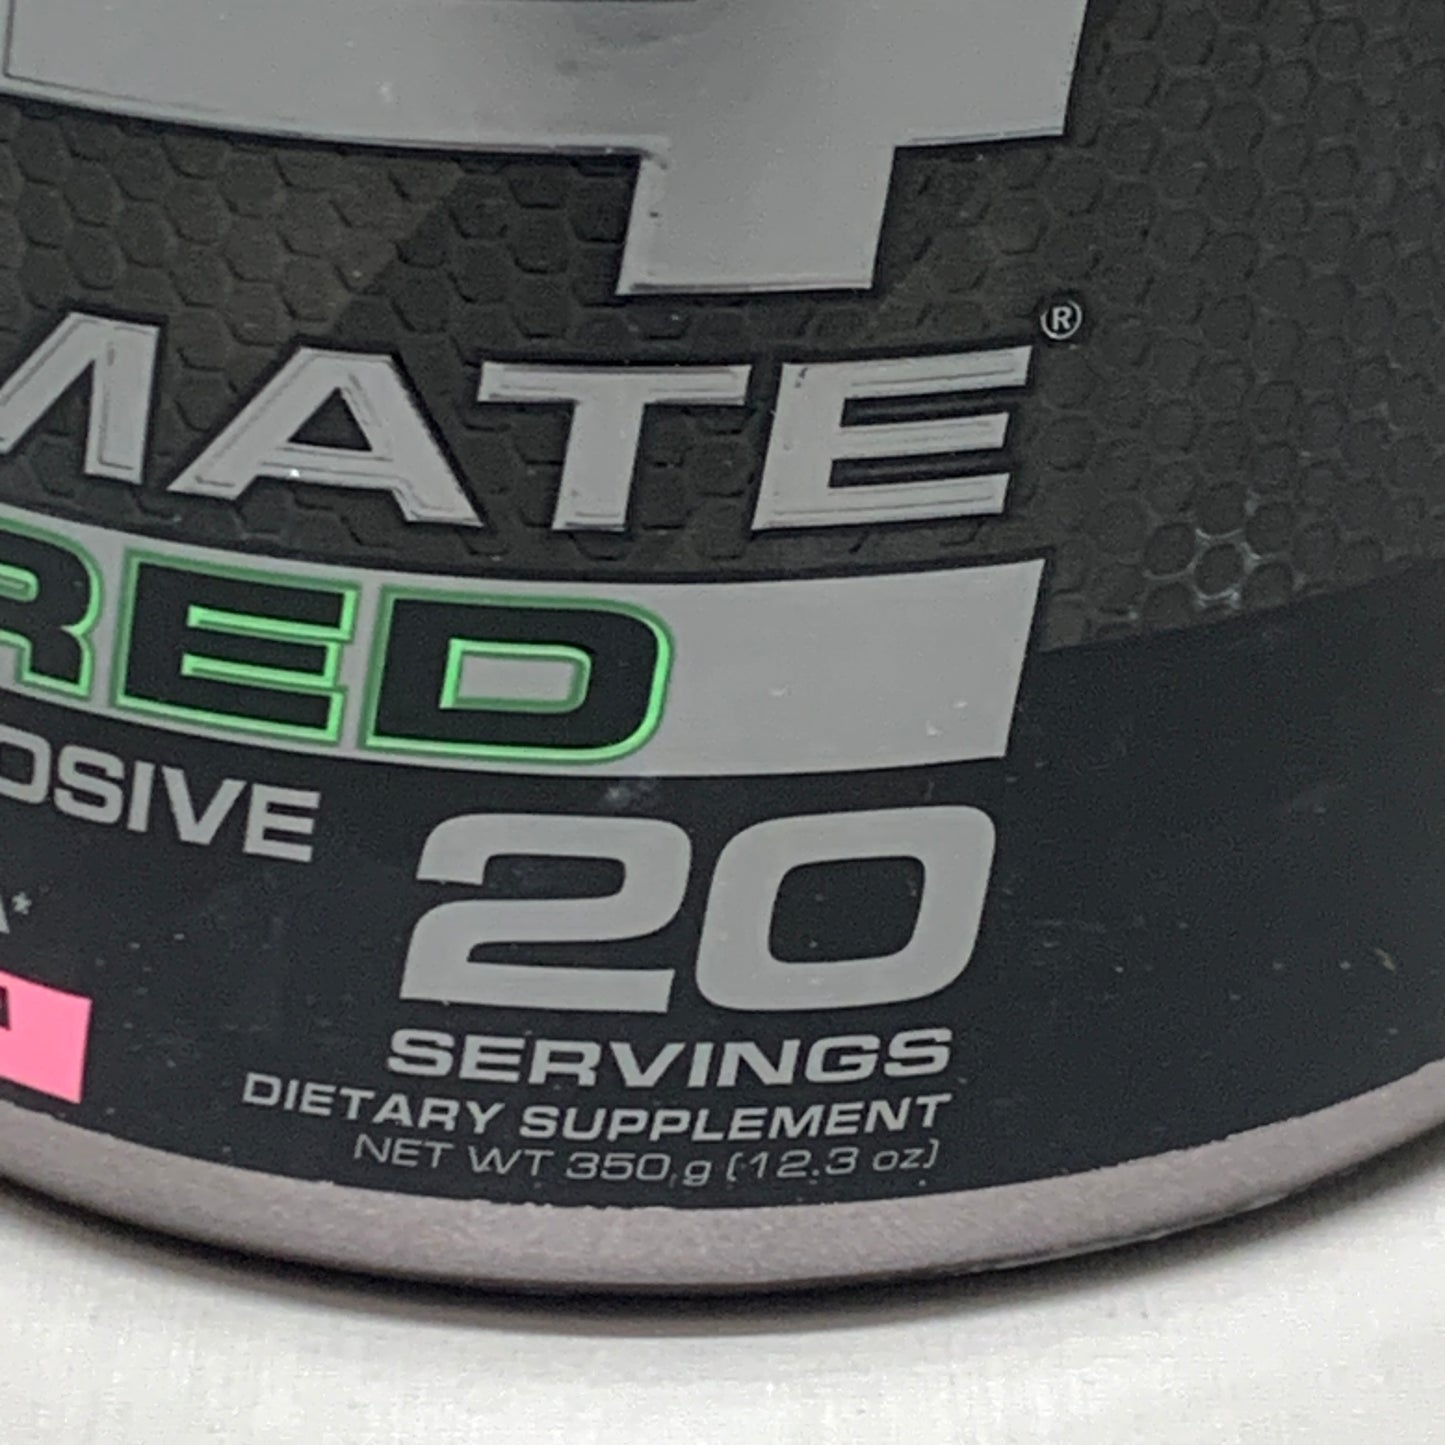 C4 | Ultimate Shred Pre-Workout, Strawberry Watermelon